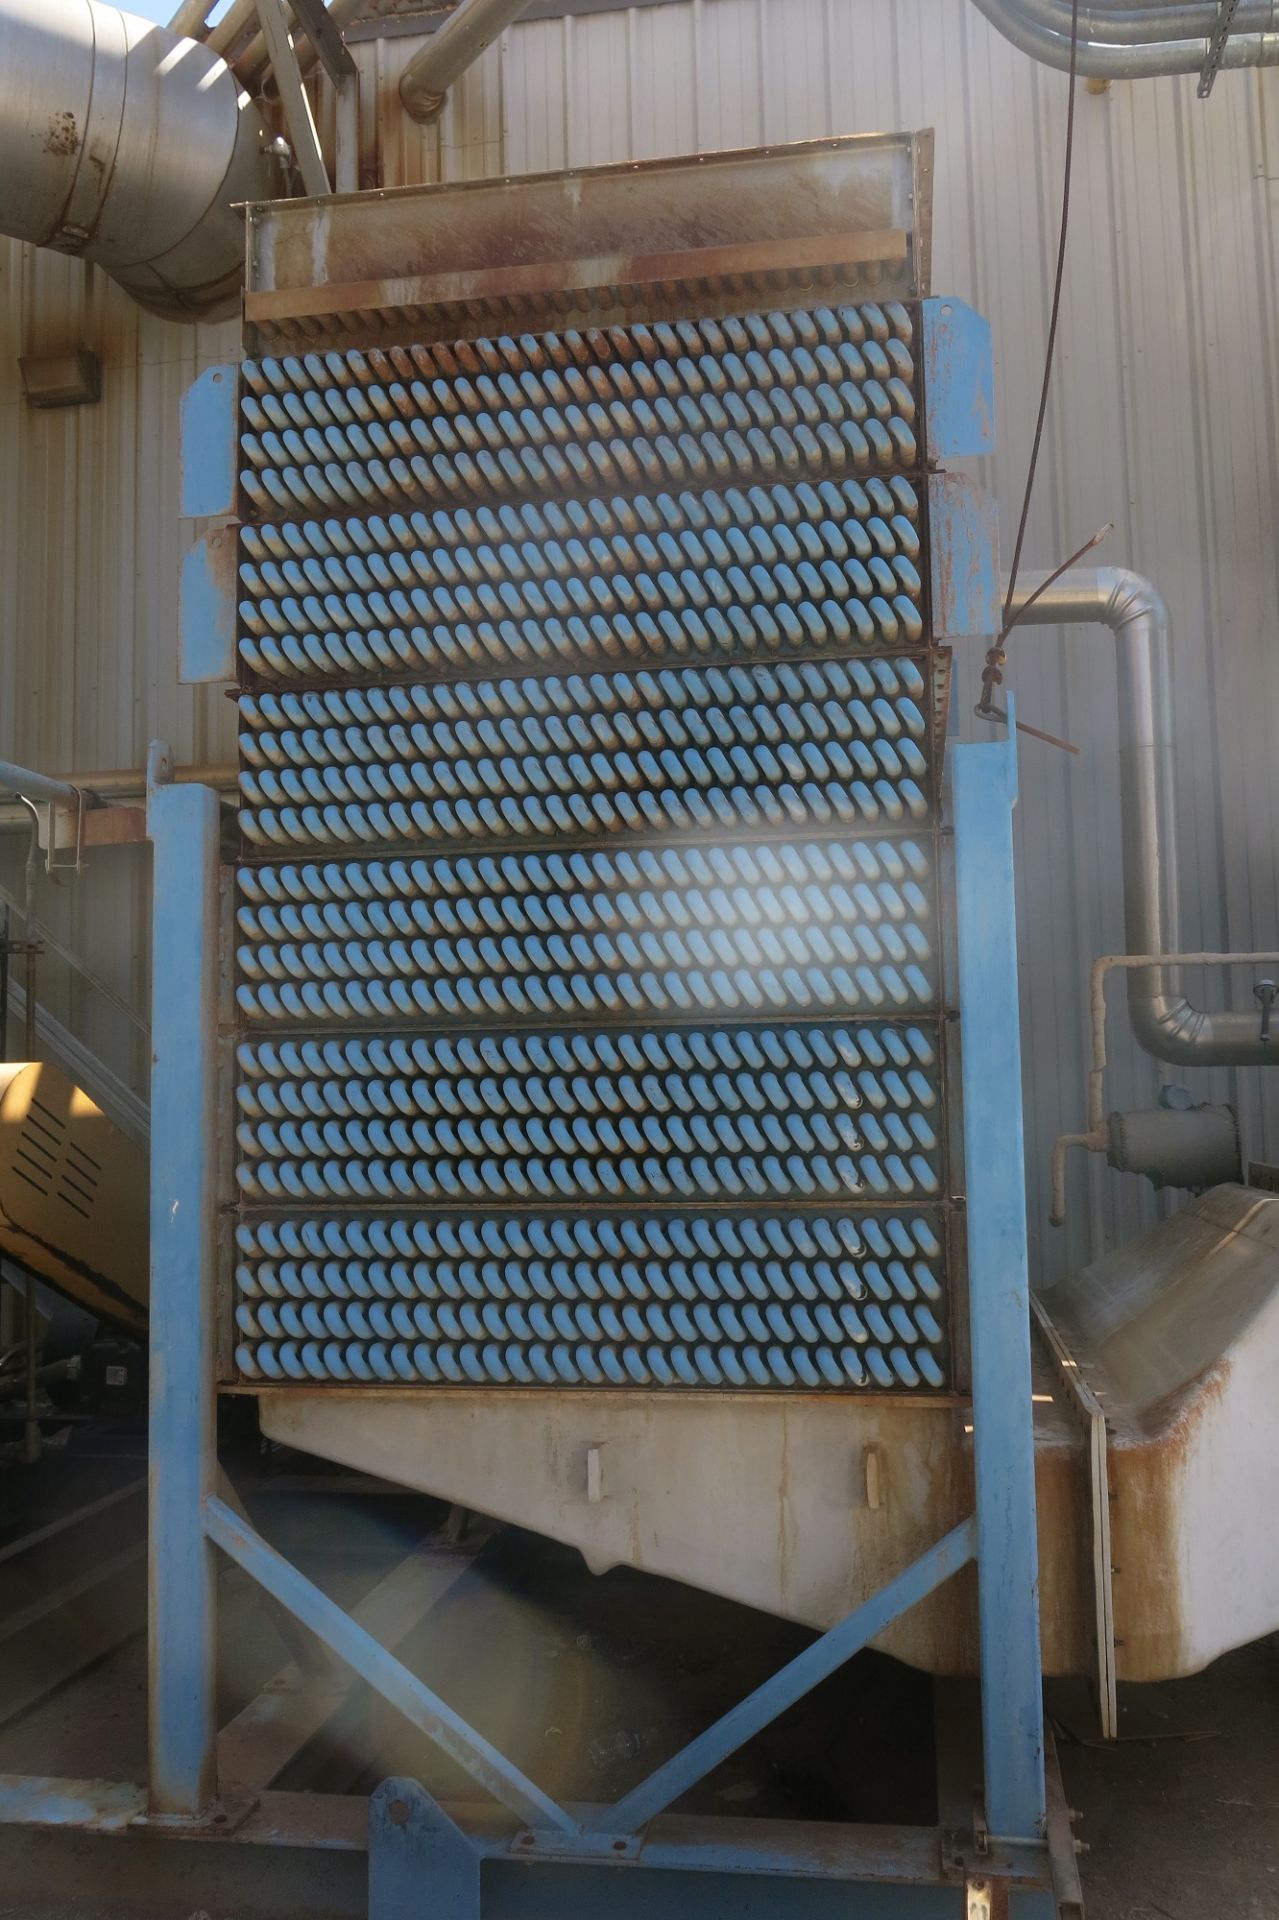 Heat Exchanger Associated with Boiler operation - Image 2 of 3